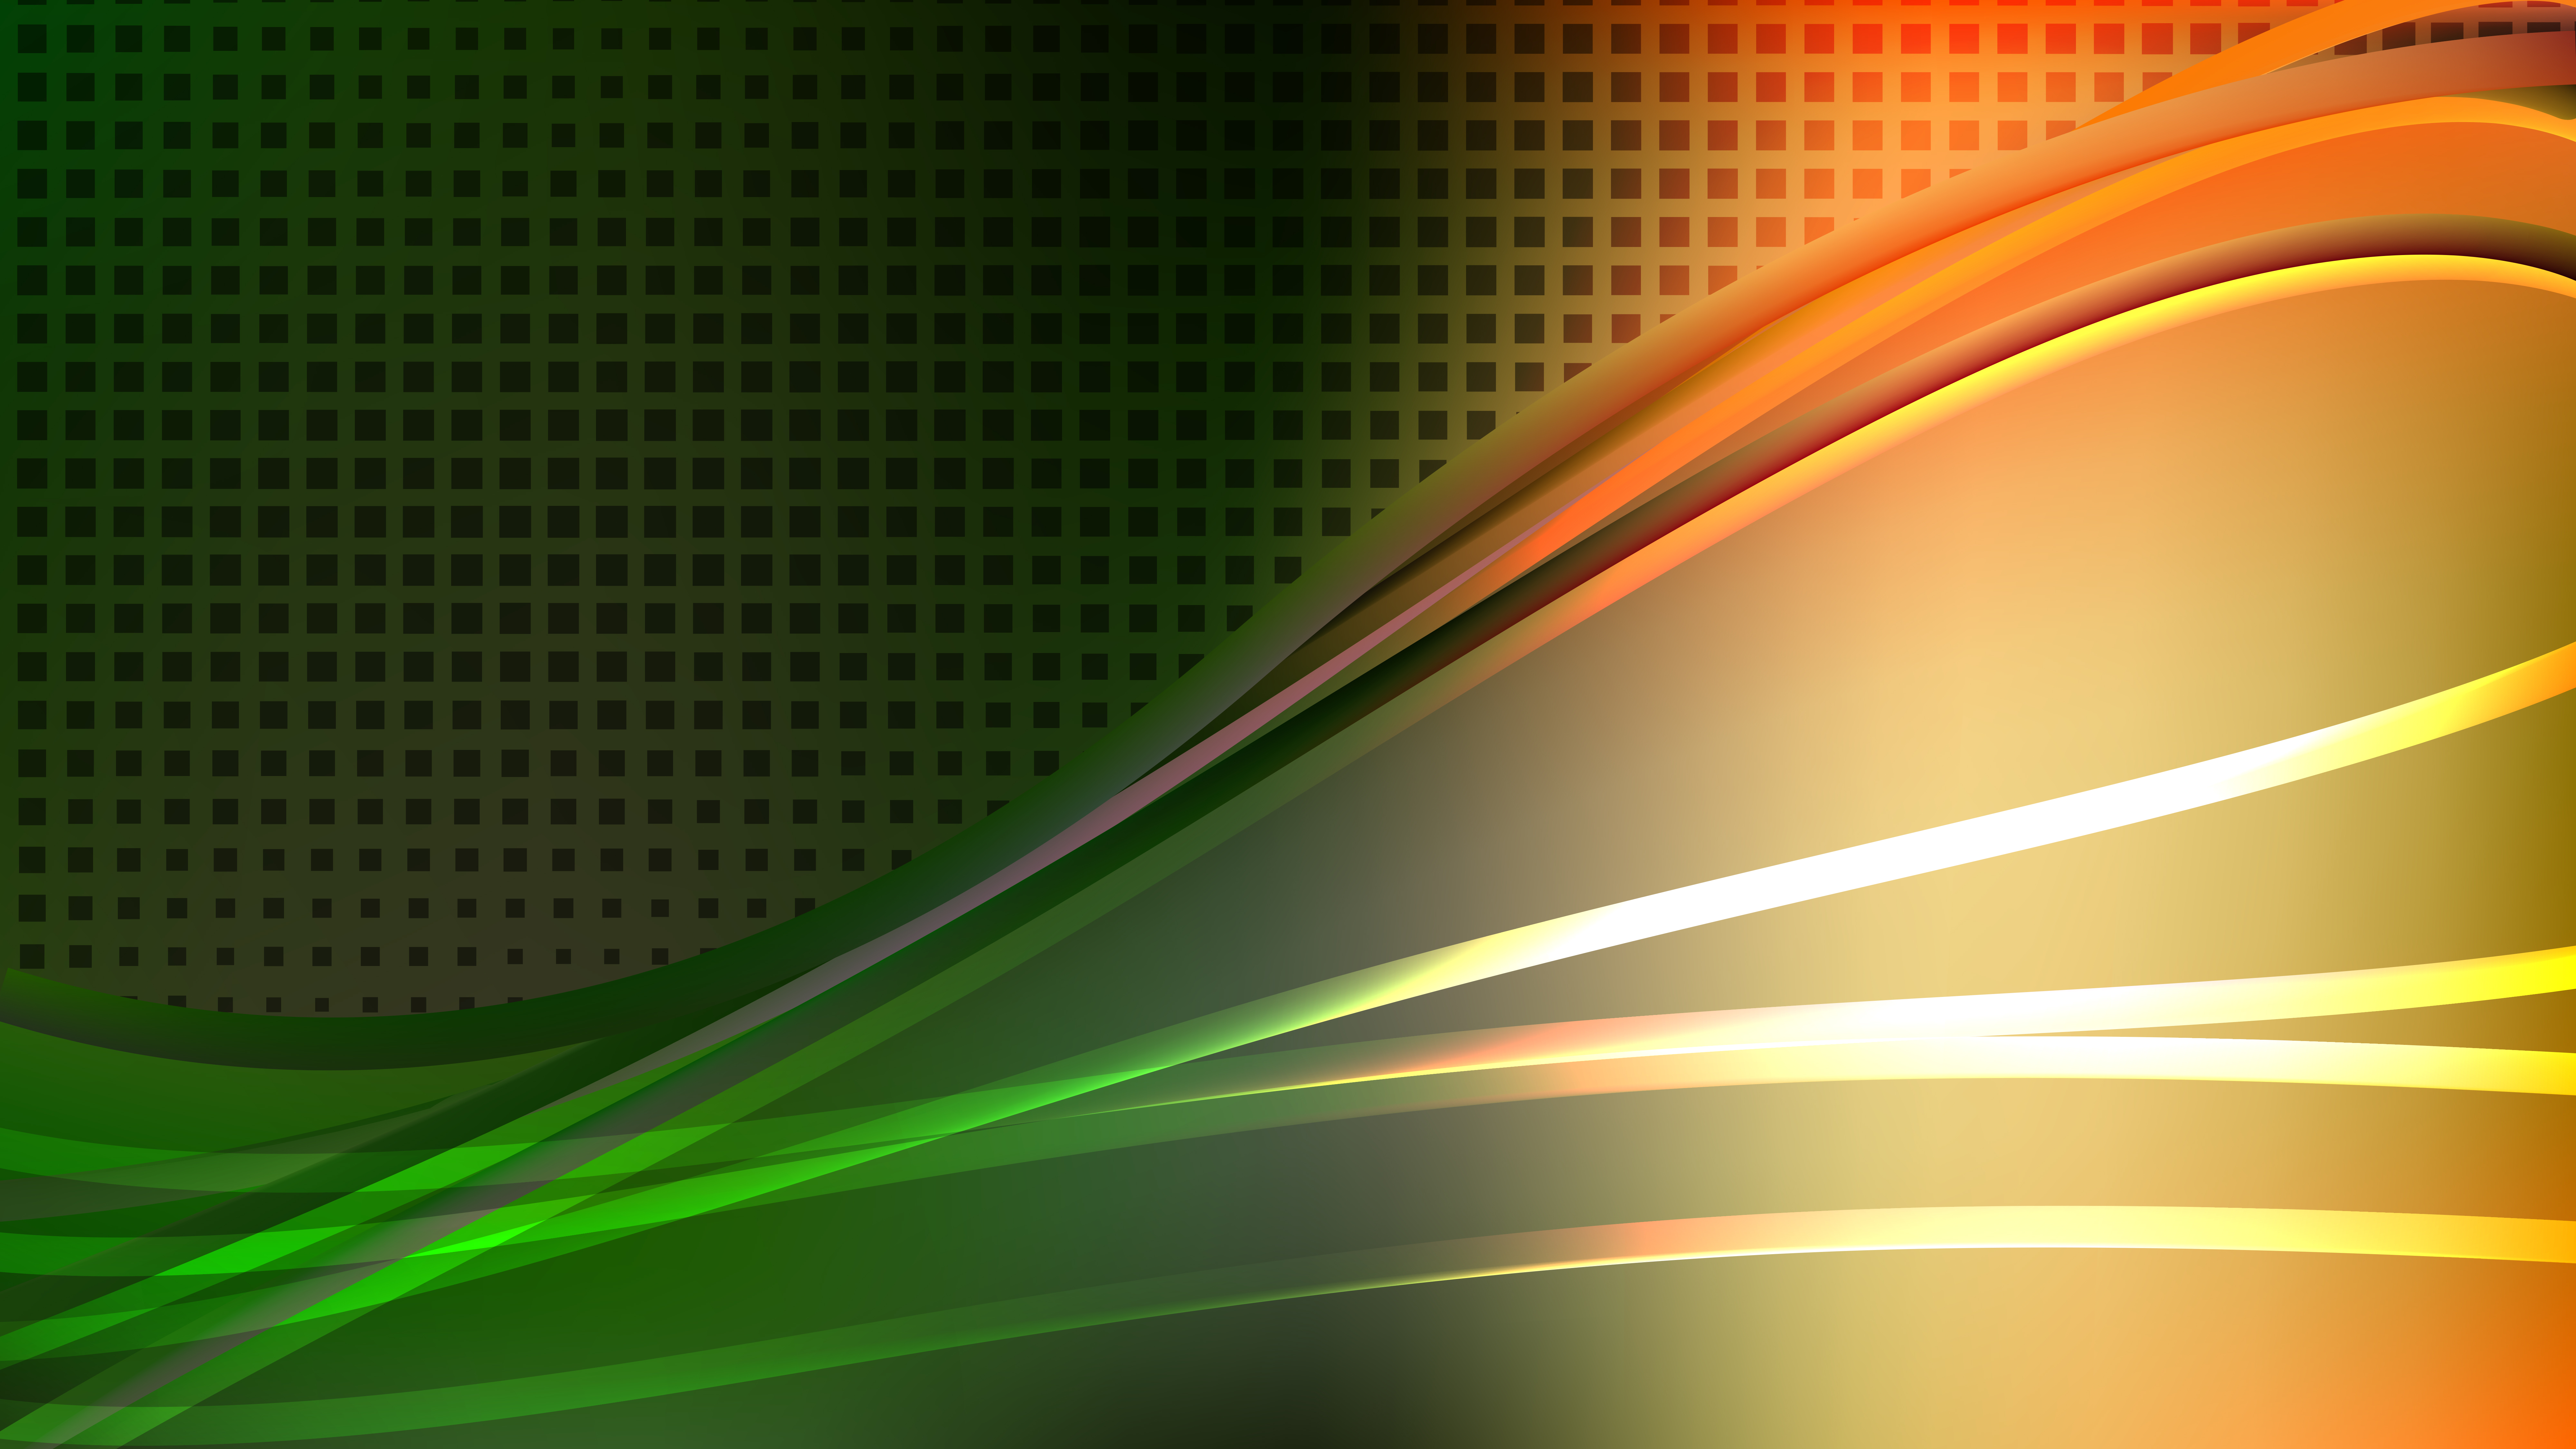 Free Abstract Orange White and Green Background Graphic Design